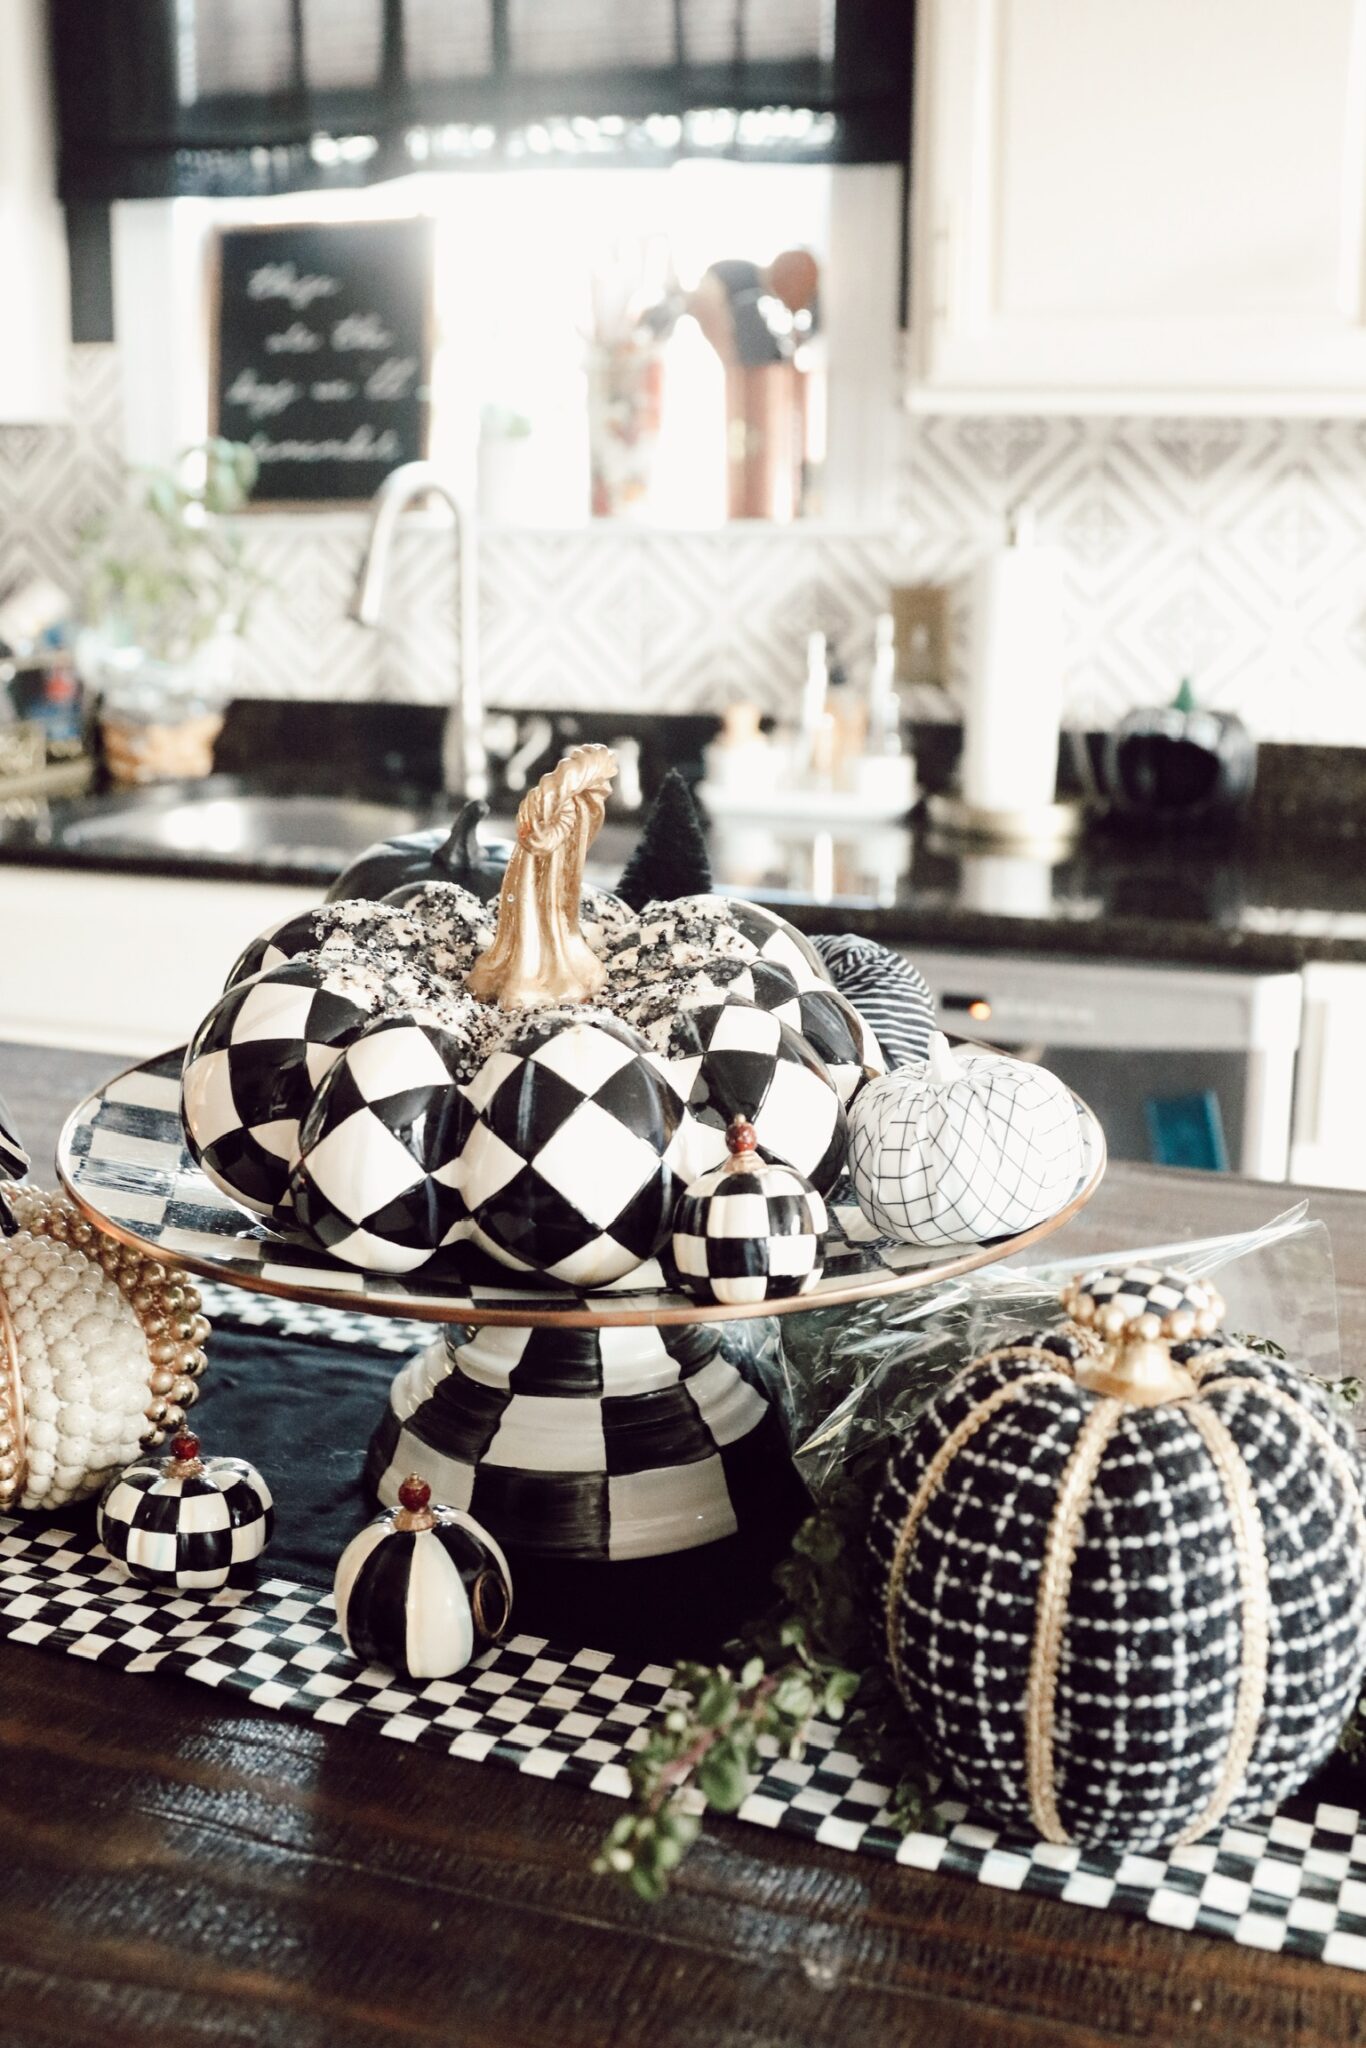 Top Nashville Lifestyle blogger, Nashville Wifestyles shares her Top Tips on How to Prep Your Home for Fall This Season